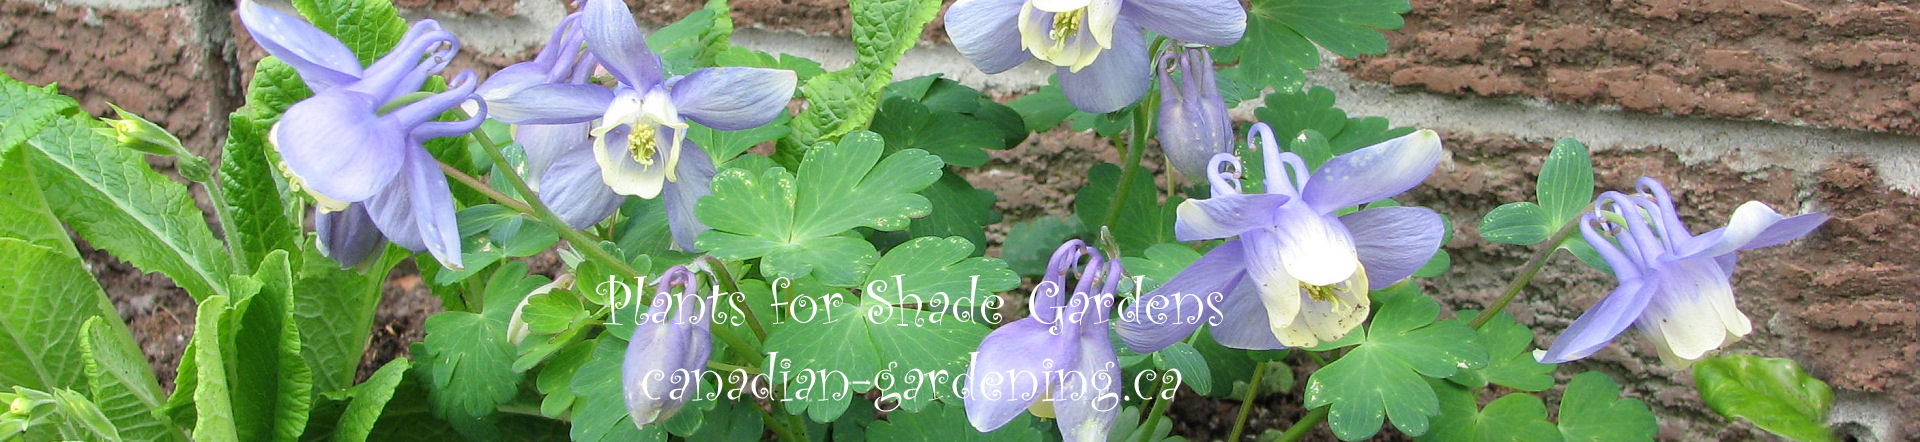  Plants for shade gardens - annuals-perennials, groundcovers and shrubs